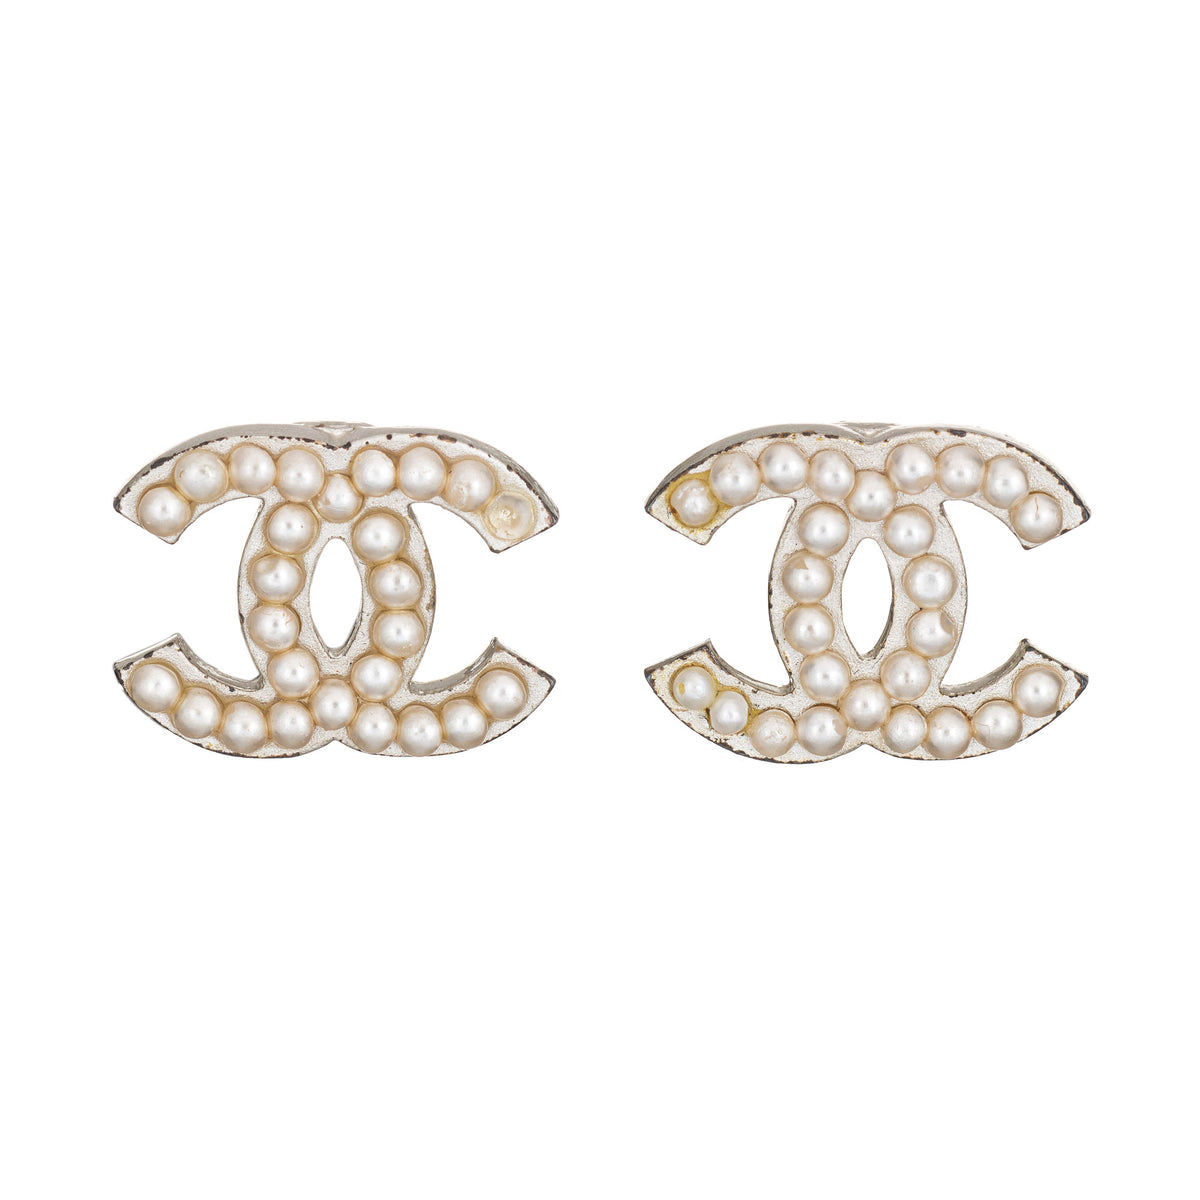 Chanel CC Crystal Silver Tone Clip-On Stud Earrings Chanel